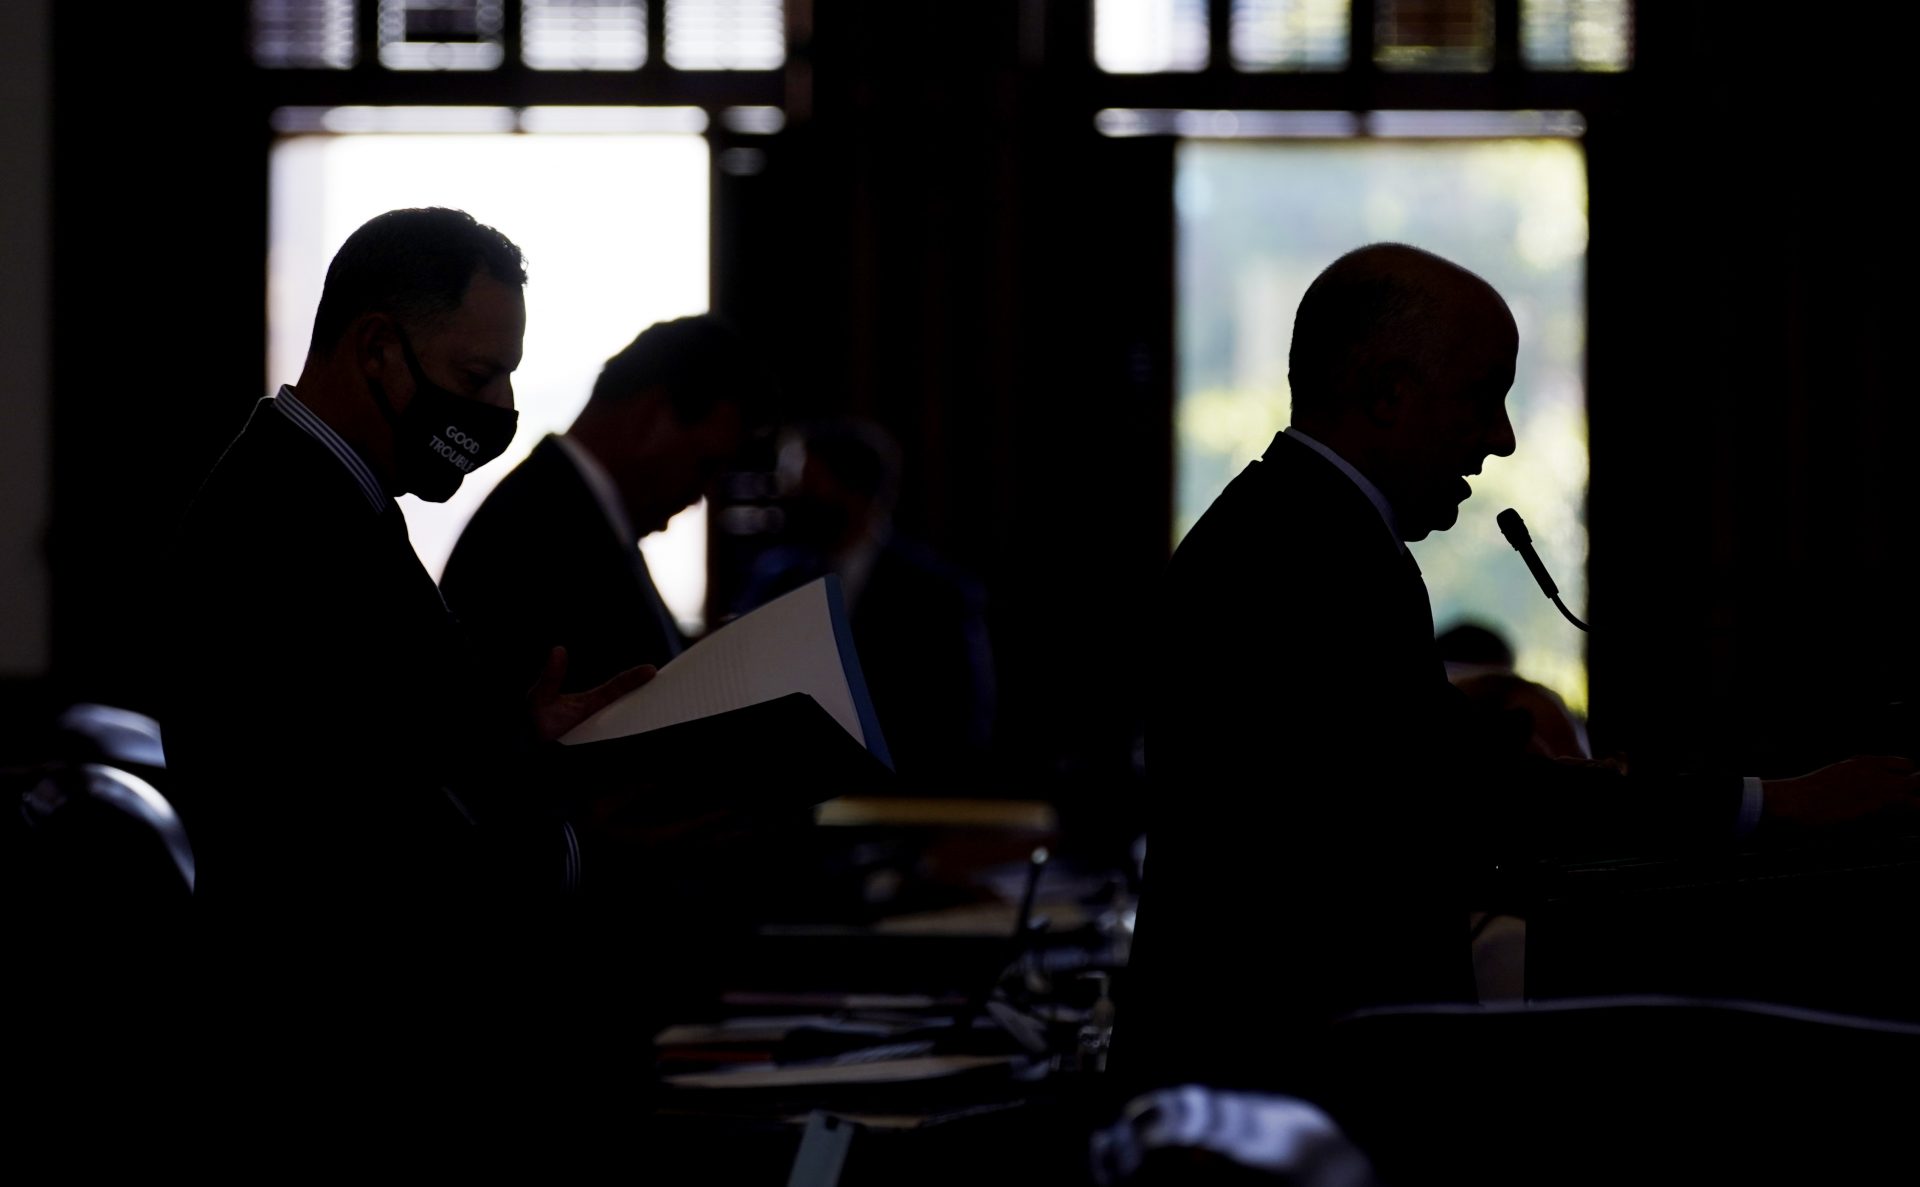 Rep. Chris Turner, D-Arlington, right, and Rep. Rafael Anchia, D-Dallas, left, line up to speak against HB 6, an election bill, in the House Chamber at the Texas Capitol in Austin, Texas, Thursday, May 6, 2021.